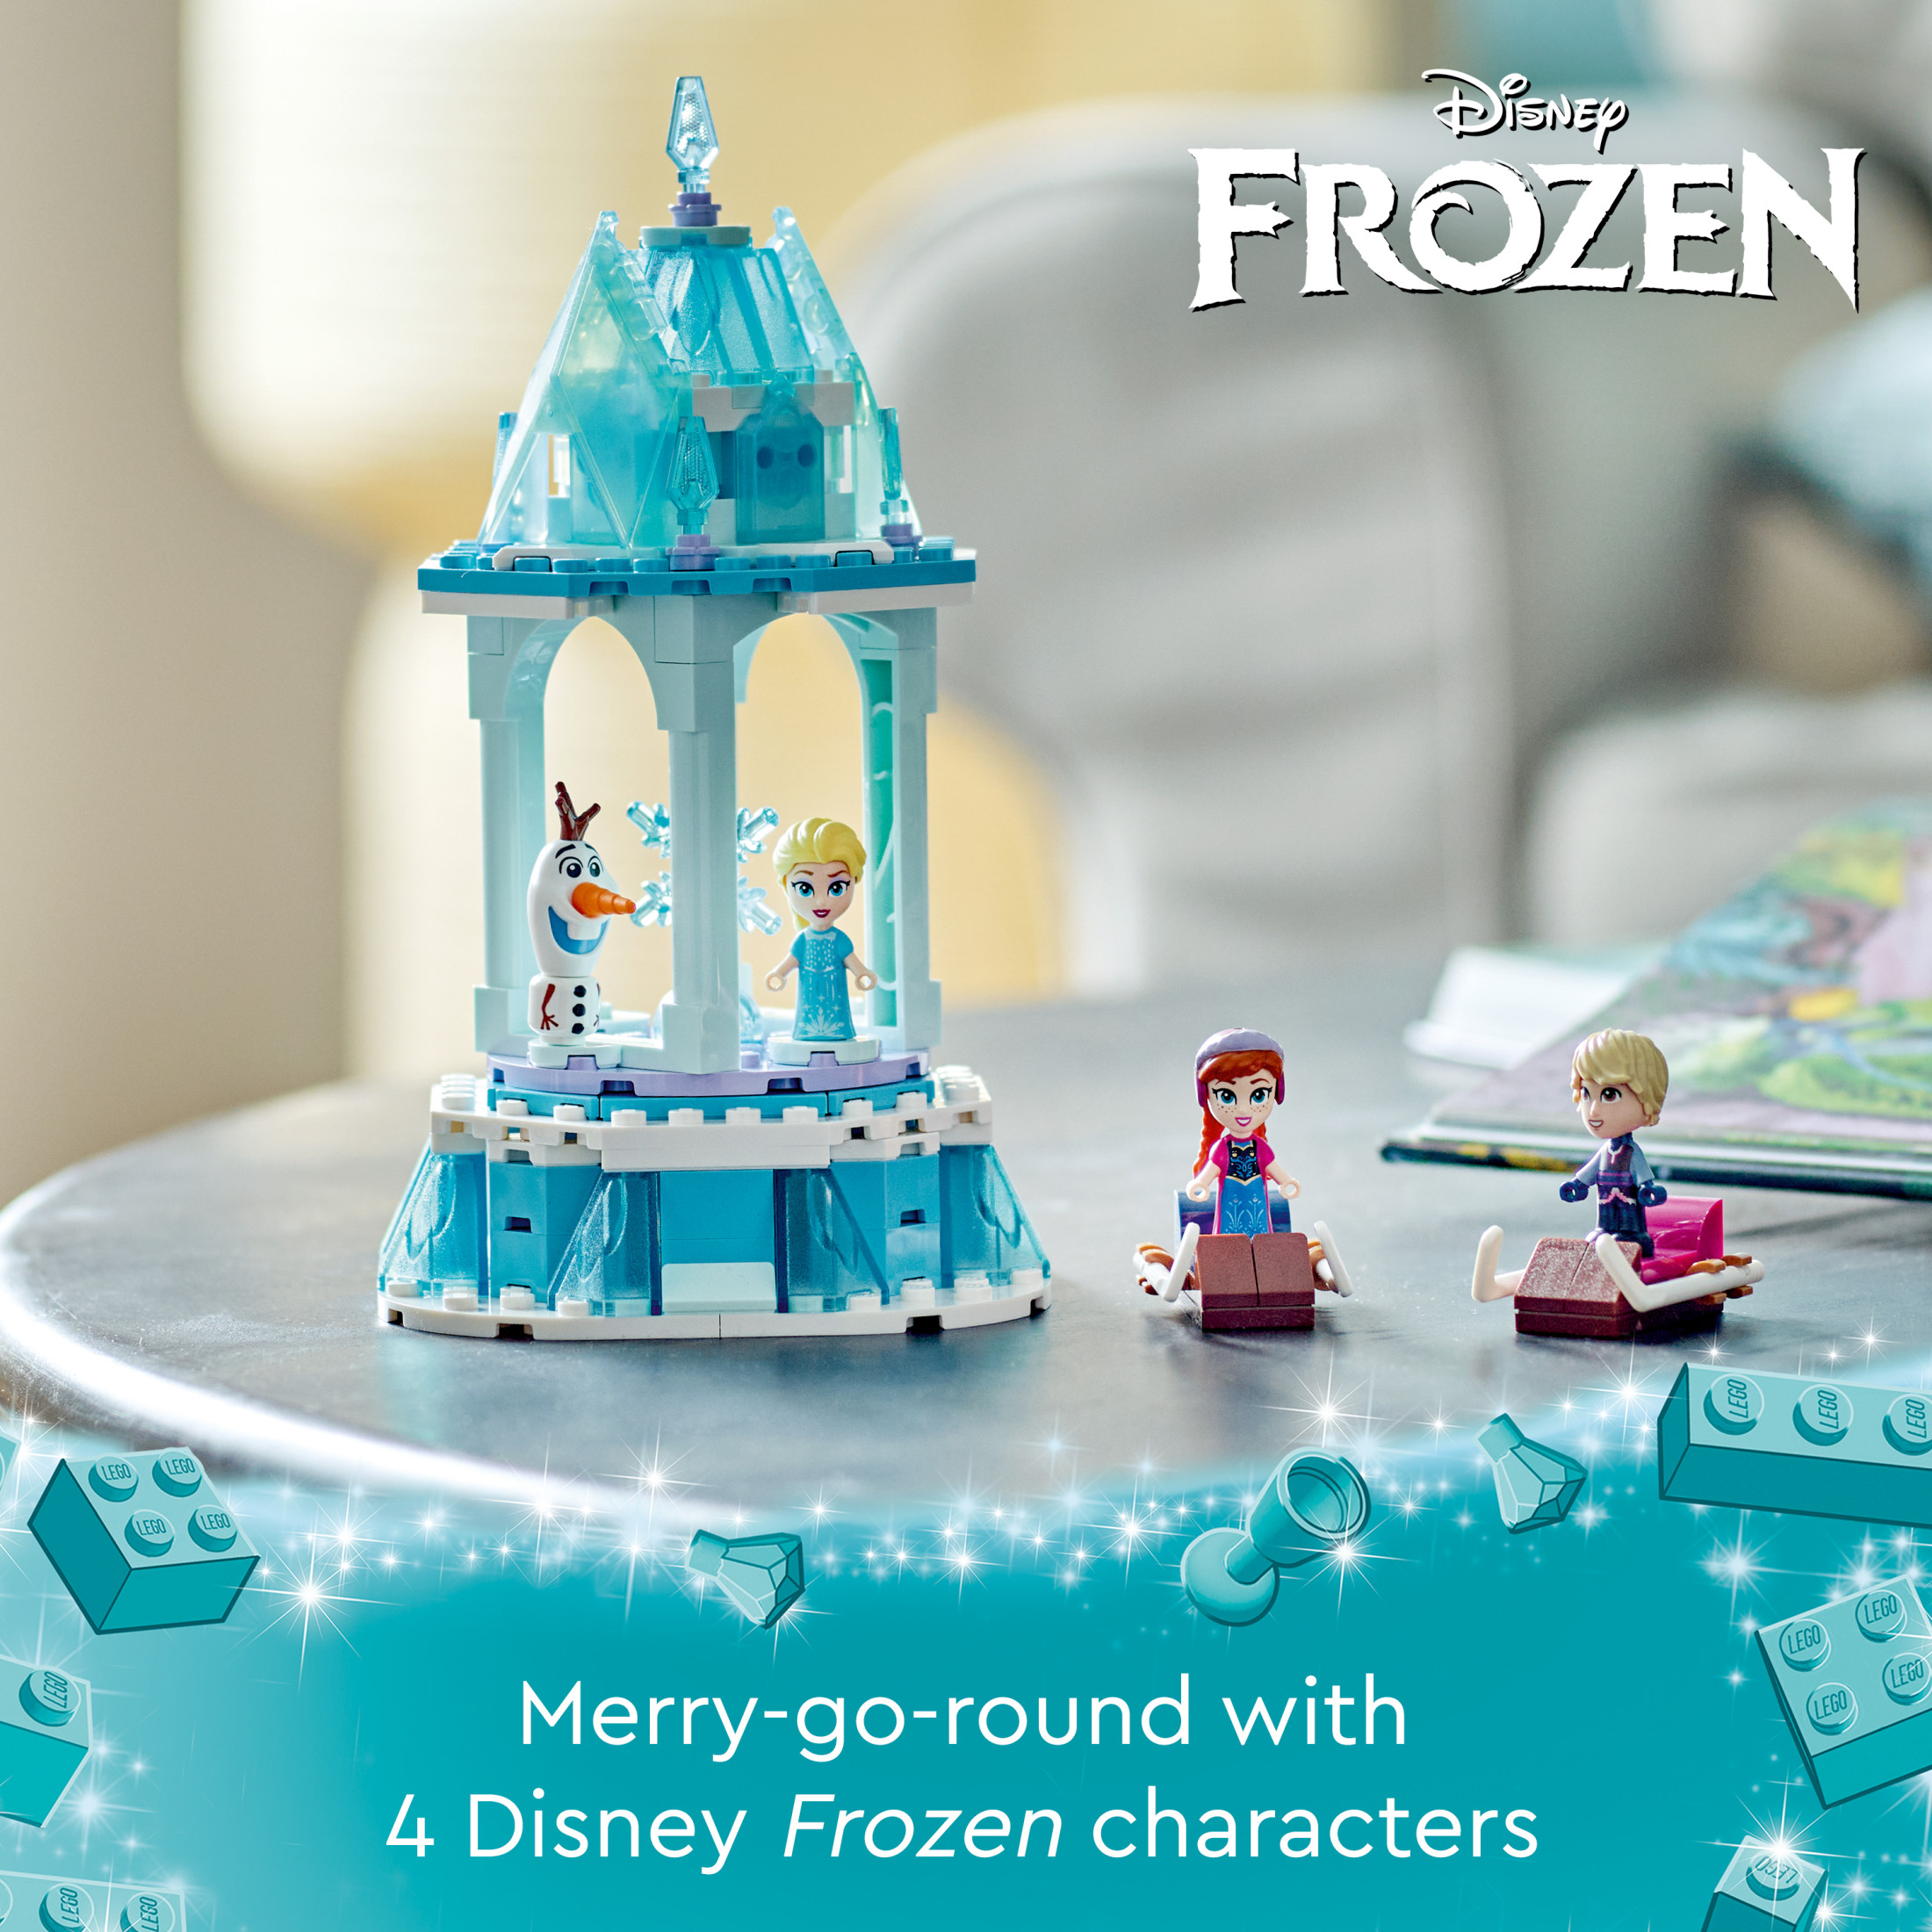 LEGO Disney Frozen Anna and Elsa’s Magical Carousel 43218 Ice Palace Building Toy Set with Disney Princess Elsa, Anna and Olaf, Great Birthday Gift for 6 Year Olds - image 4 of 8